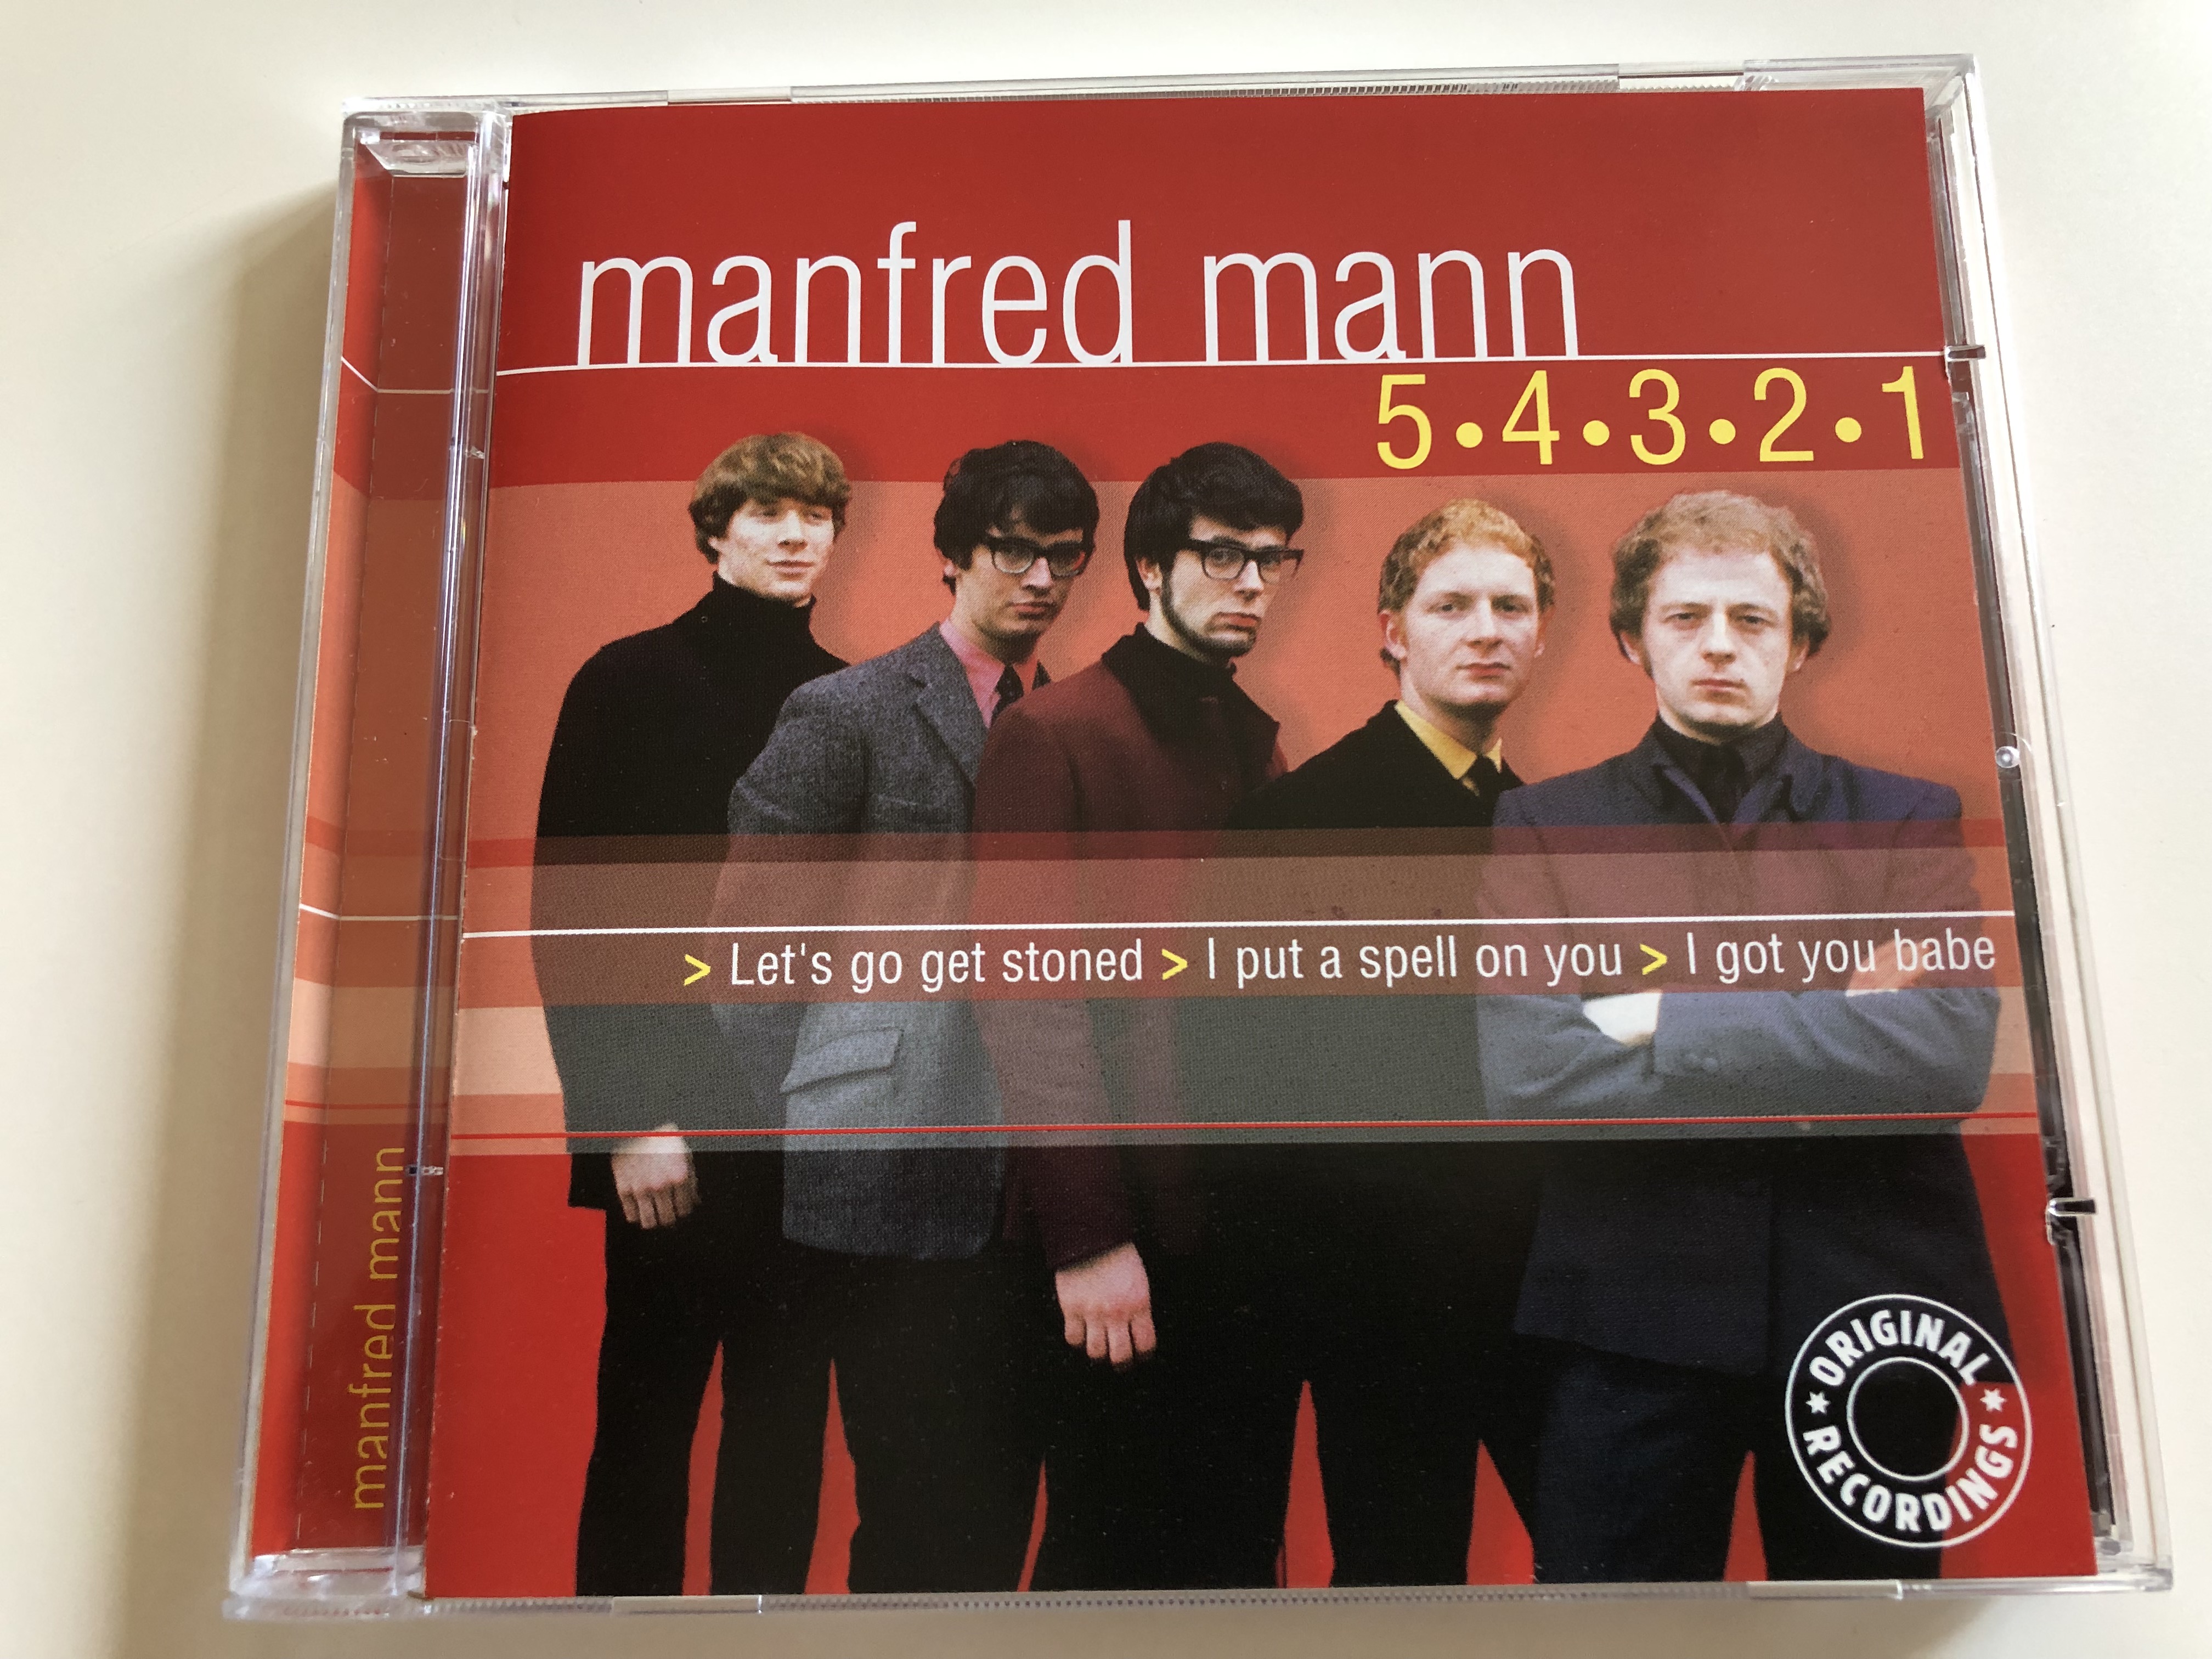 manfred-mann-5-4-3-2-1-let-s-go-get-stoned-i-put-a-spell-on-you-i-got-you-babe-pure-gold-audio-cd-2002-go-793462-1-.jpg